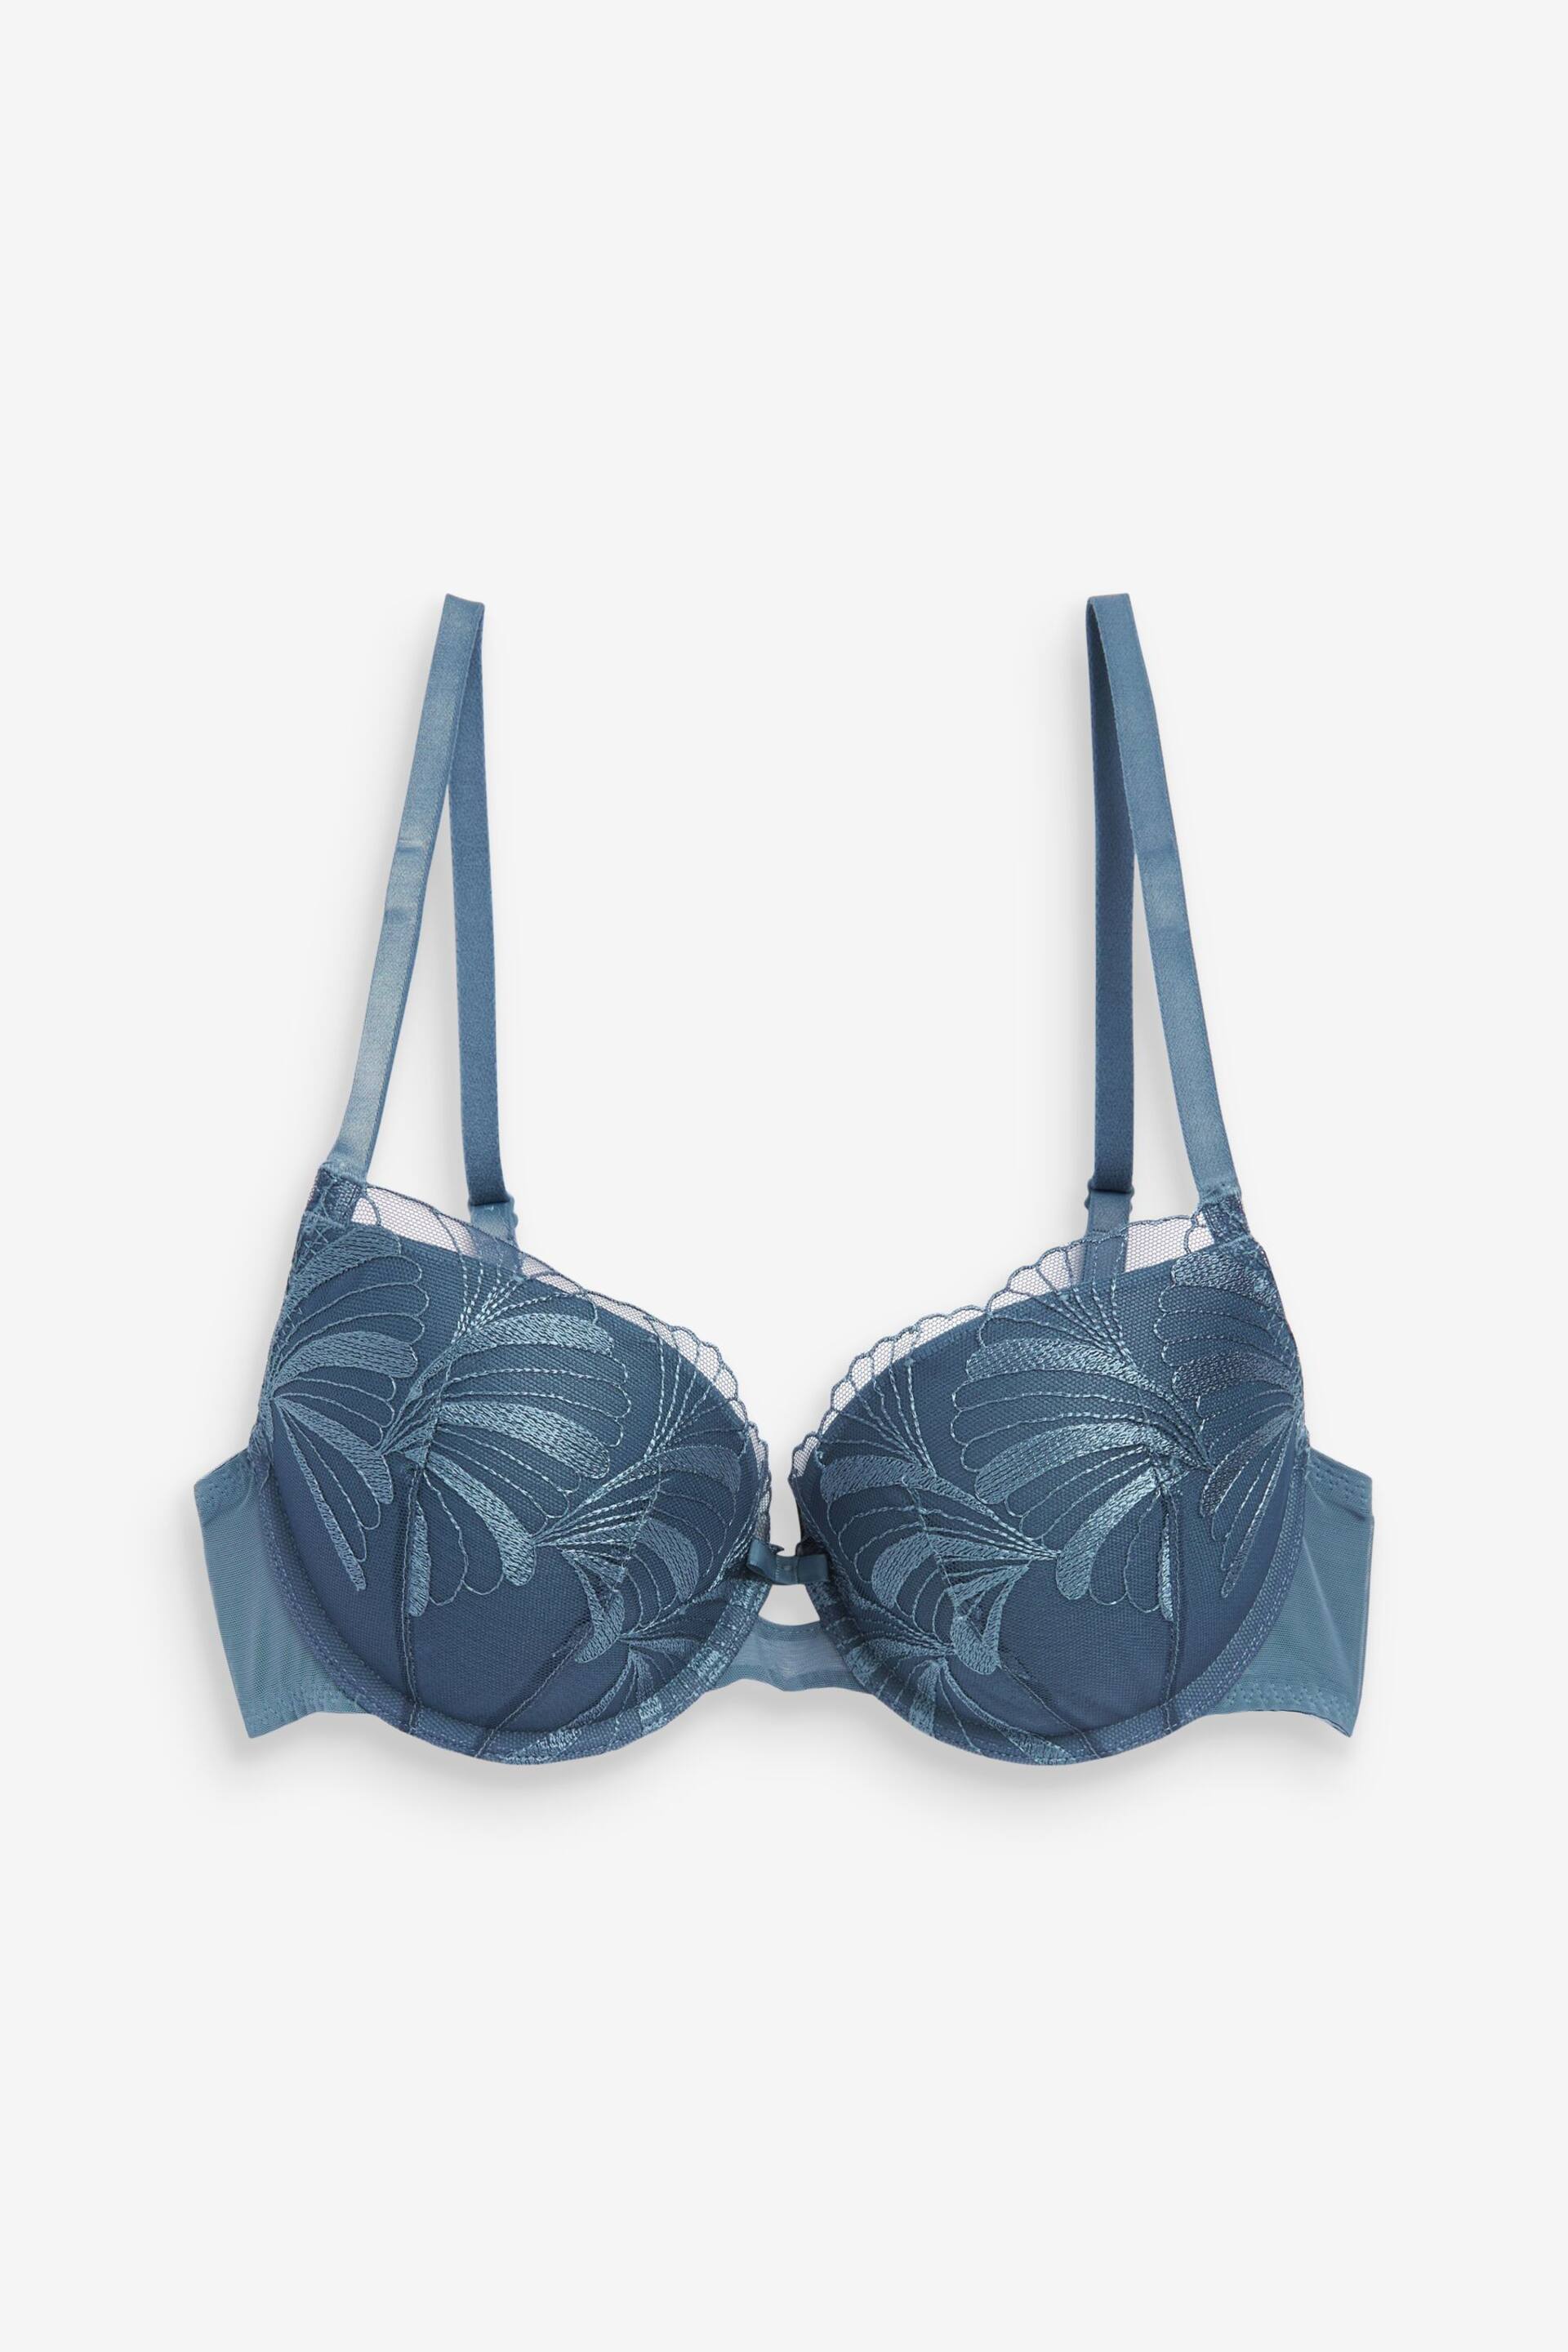 Blue/Nude Pad Balcony Embroidered Bras 2 Pack - Image 11 of 12